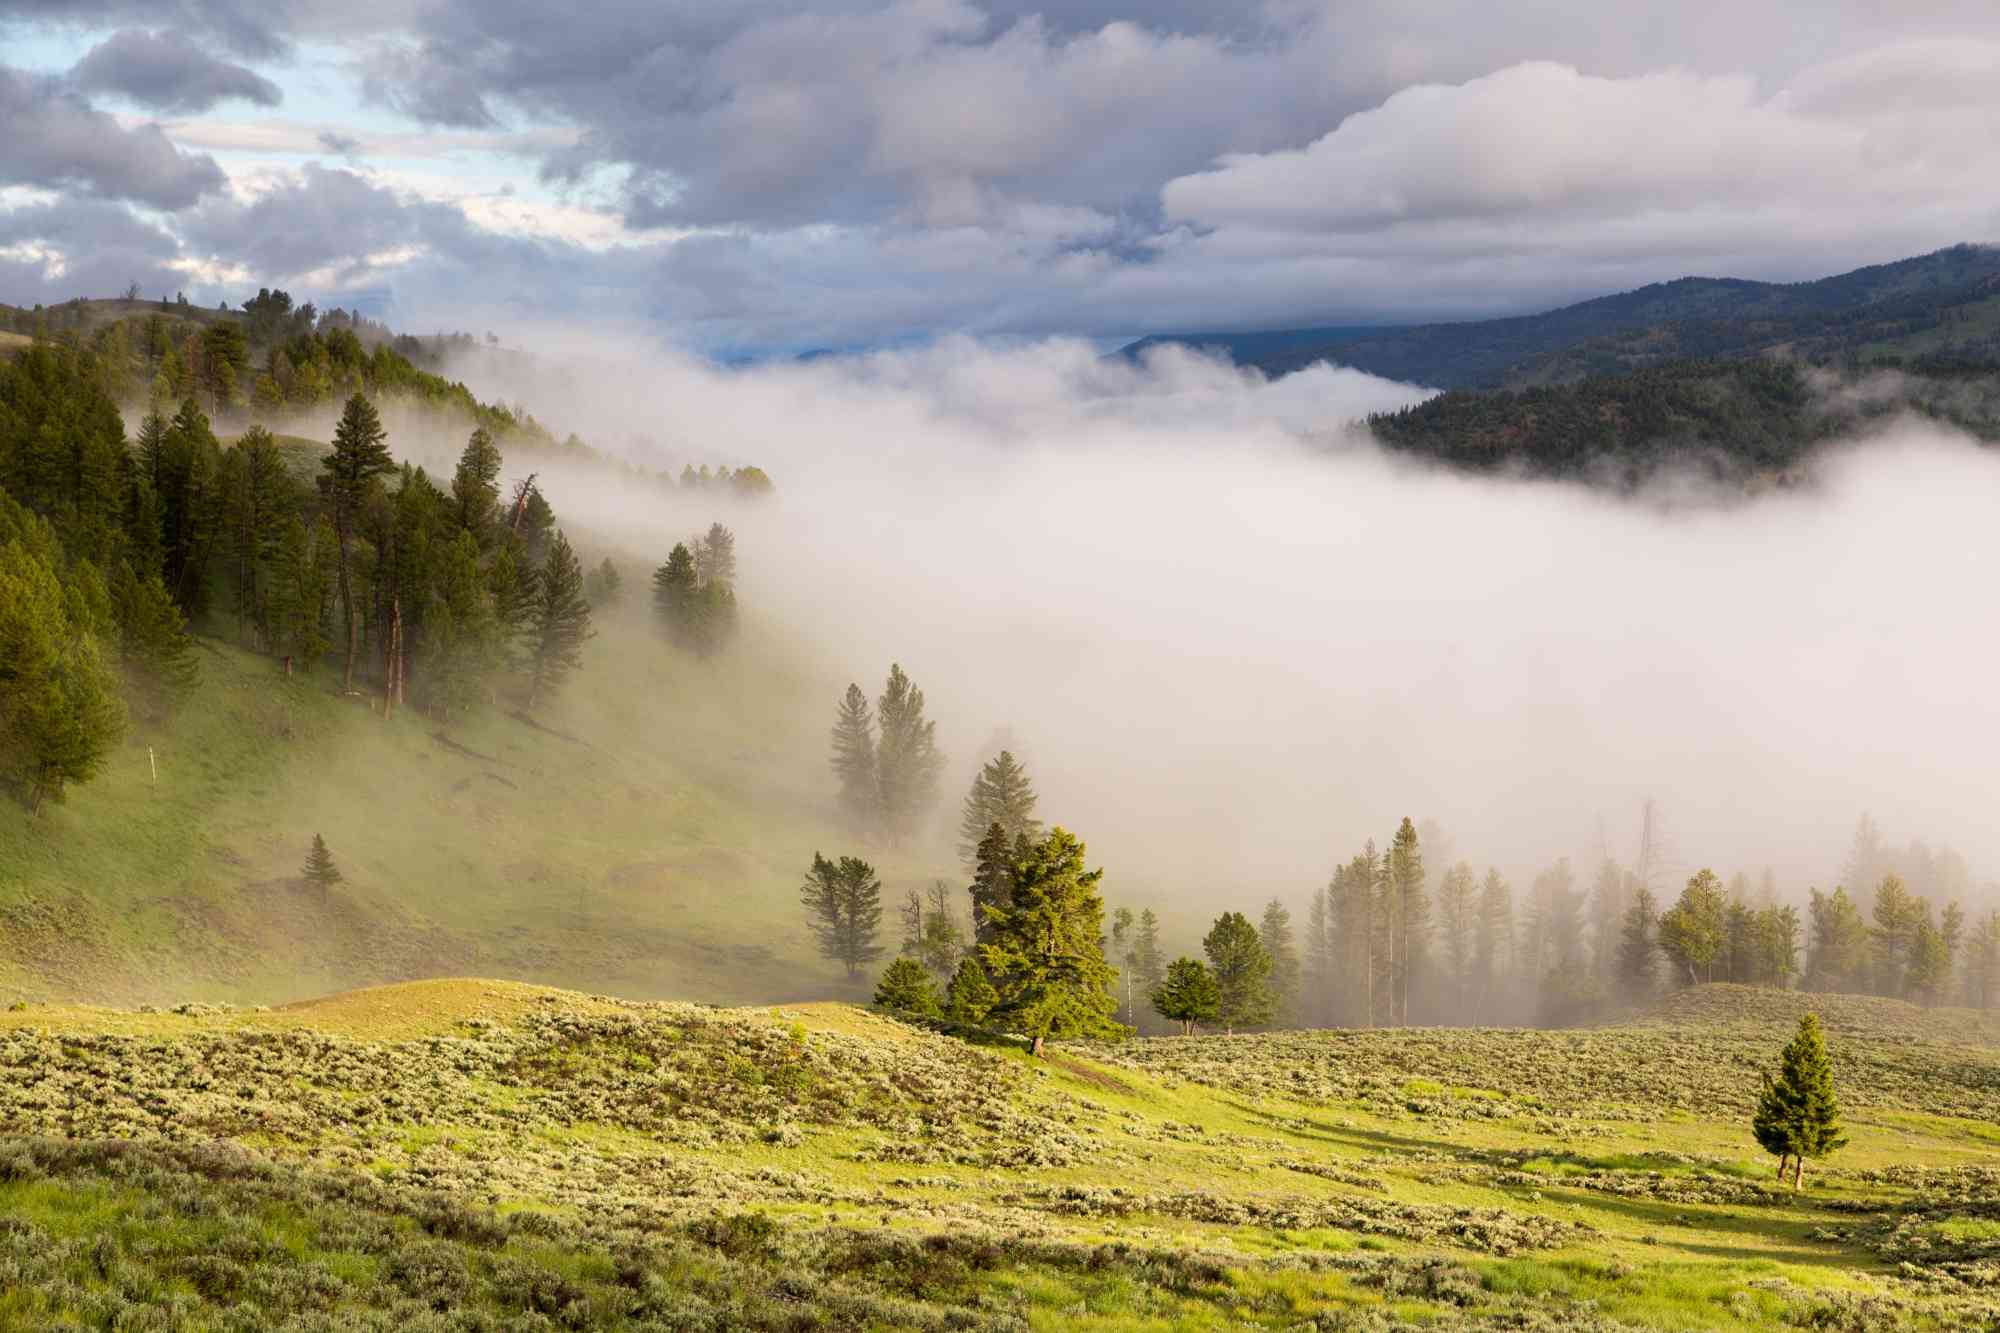 Morning fog in the Yellowstone River Valley